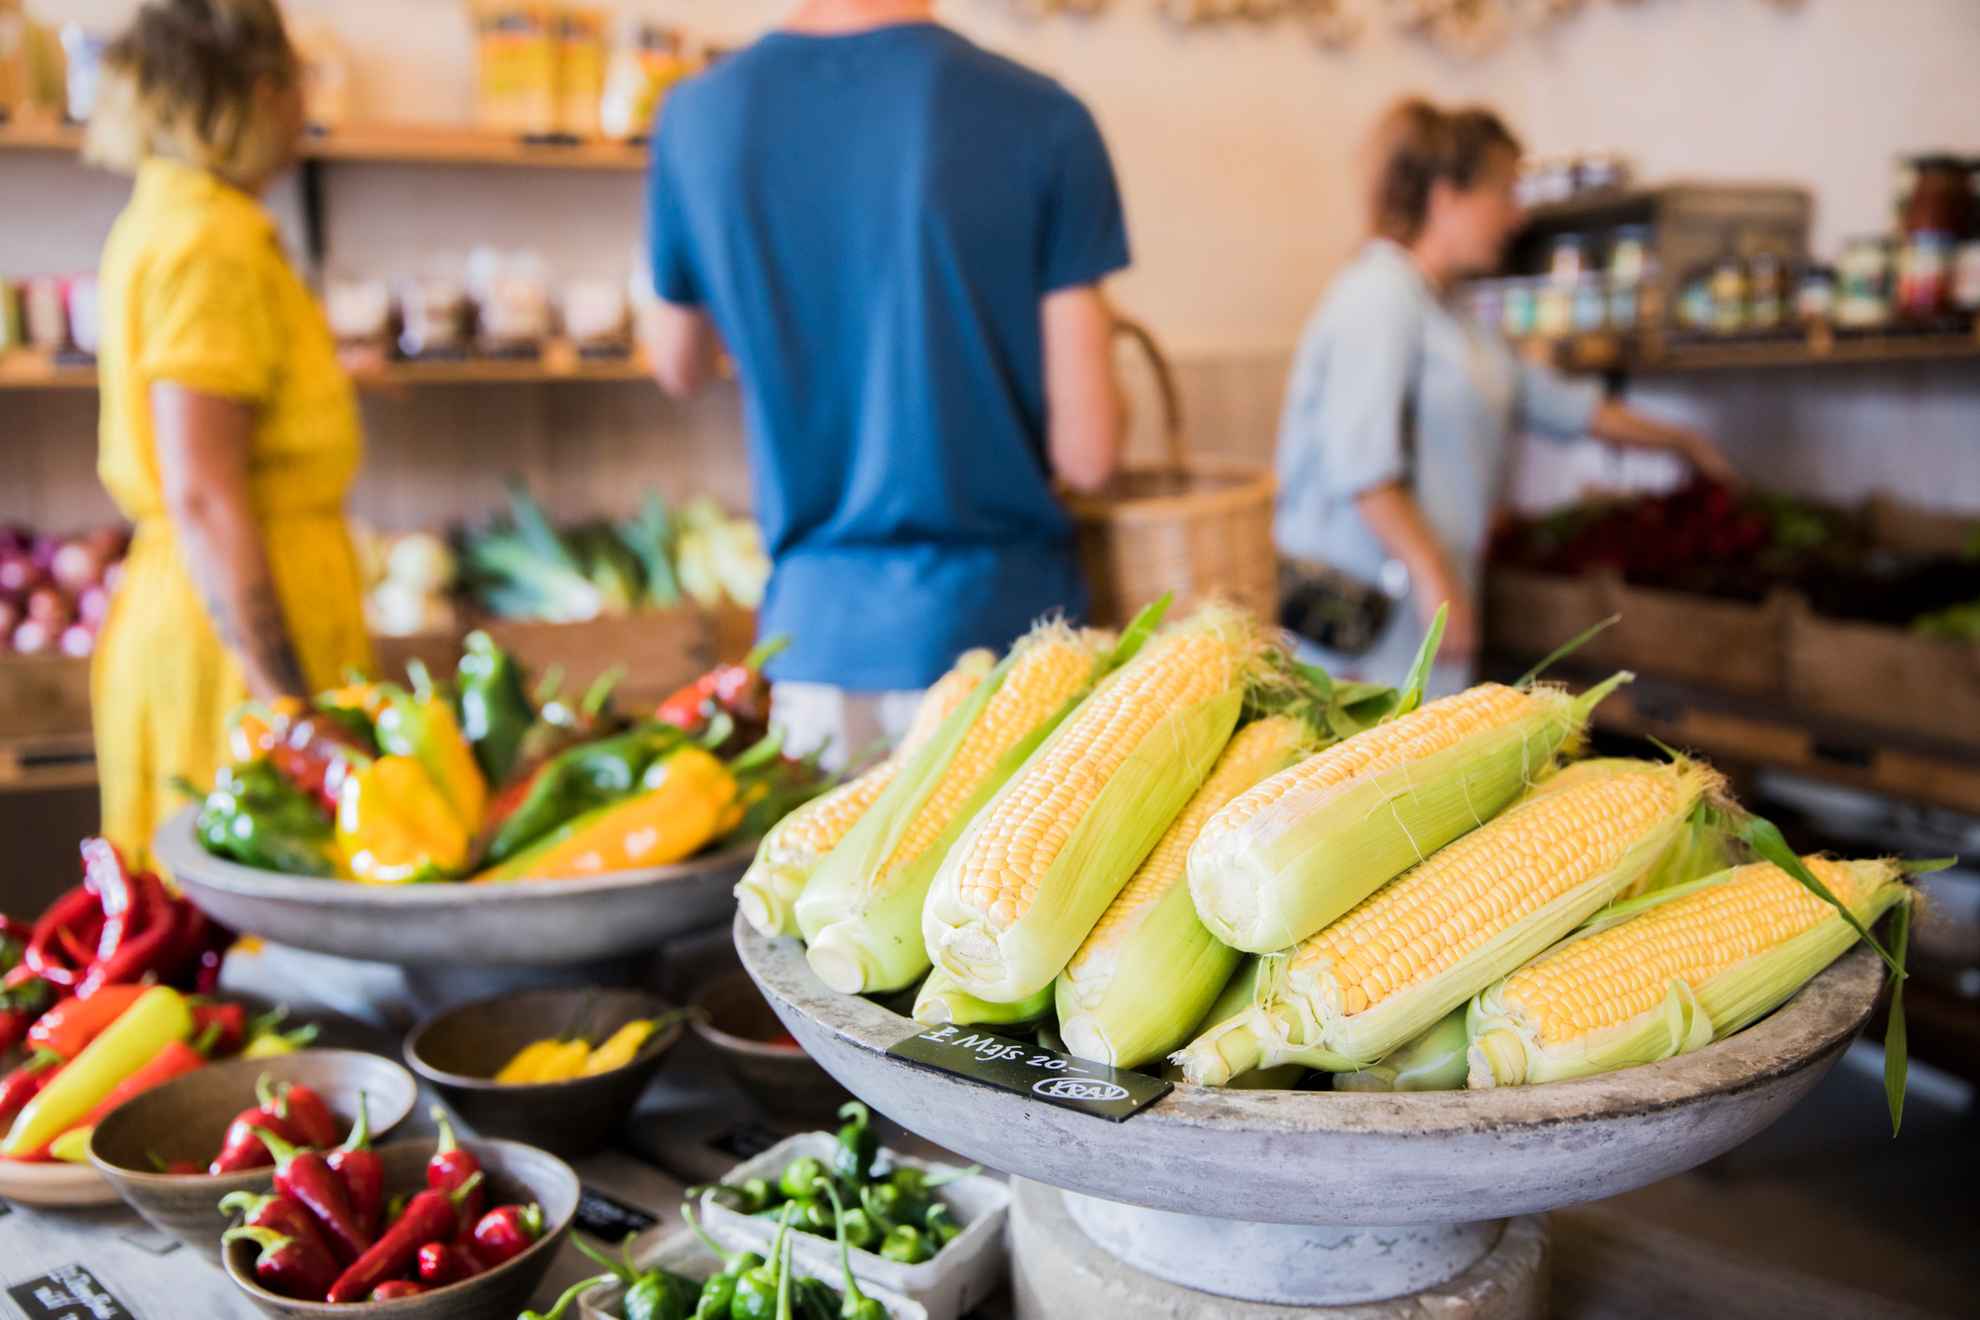 Close-up on corn-cob and a variety of pepper in a farm shop. Three persons is seen blurry in the background.